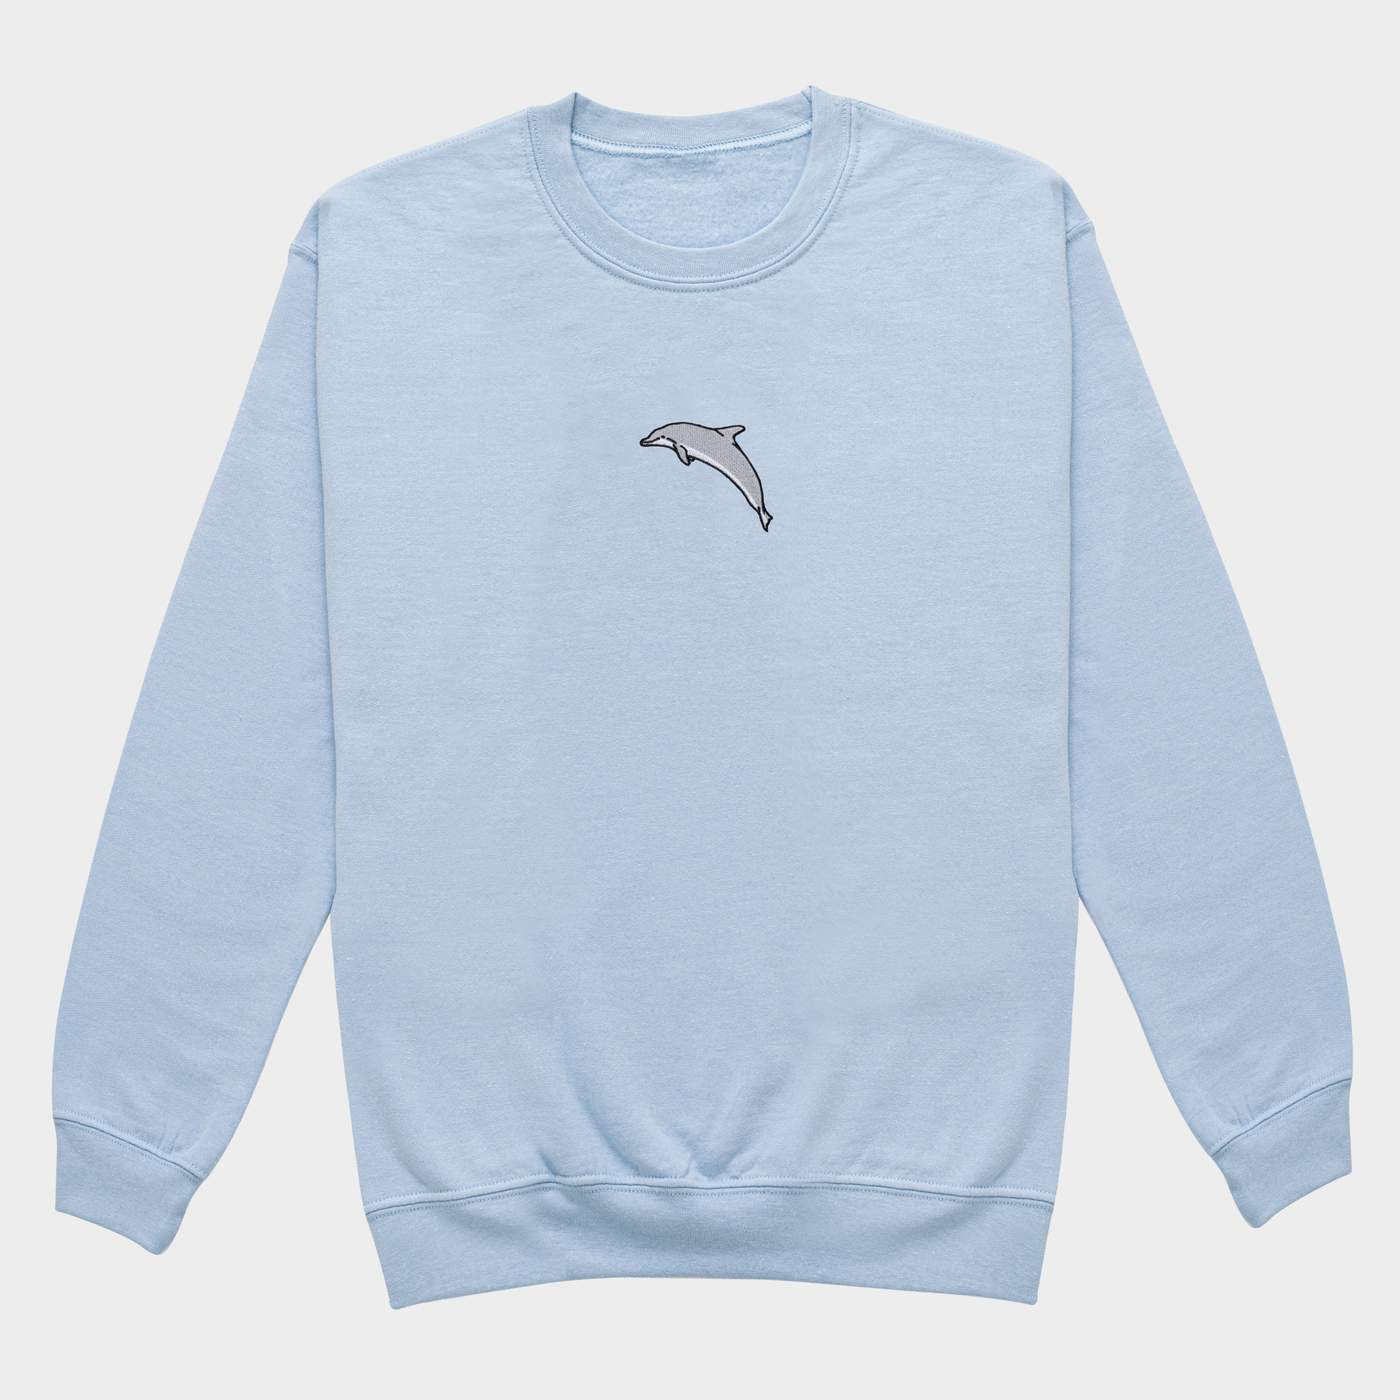 Bobby's Planet Women's Embroidered Dolphin Sweatshirt from Seven Seas Fish Animals Collection in Light Blue Color#color_light-blue